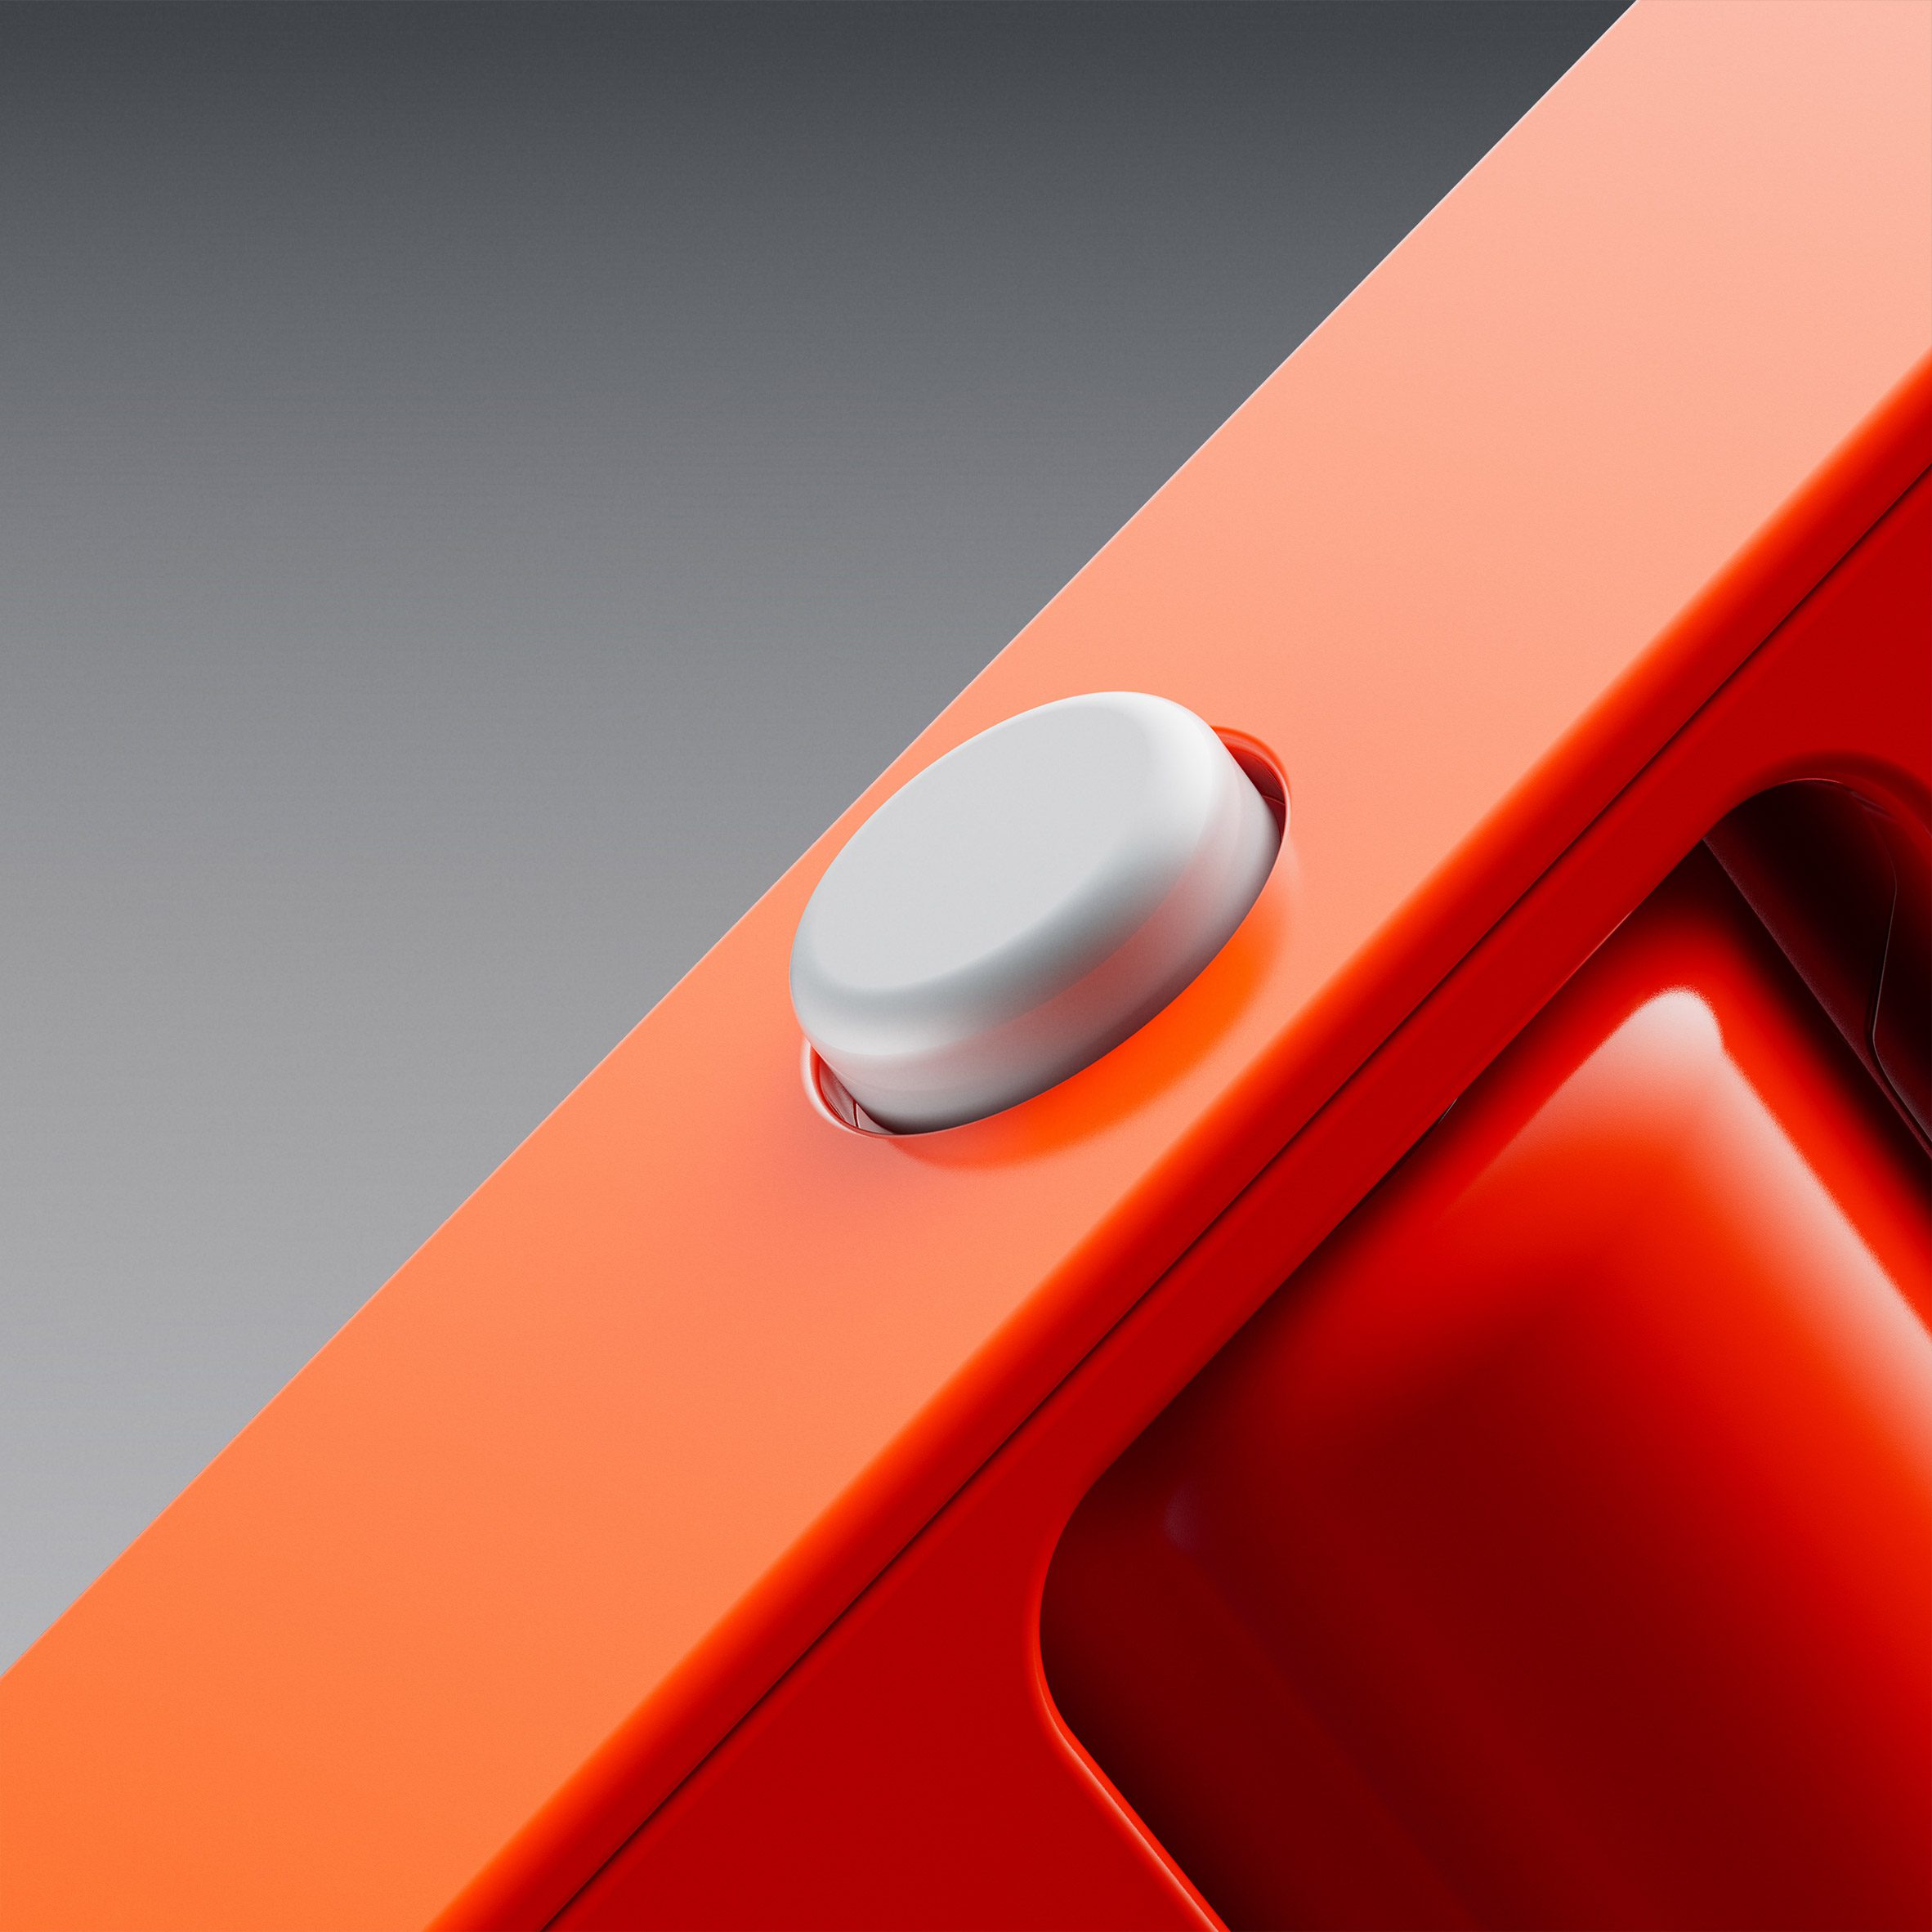 Close-up image of a small grey button on the side of a slim orange device